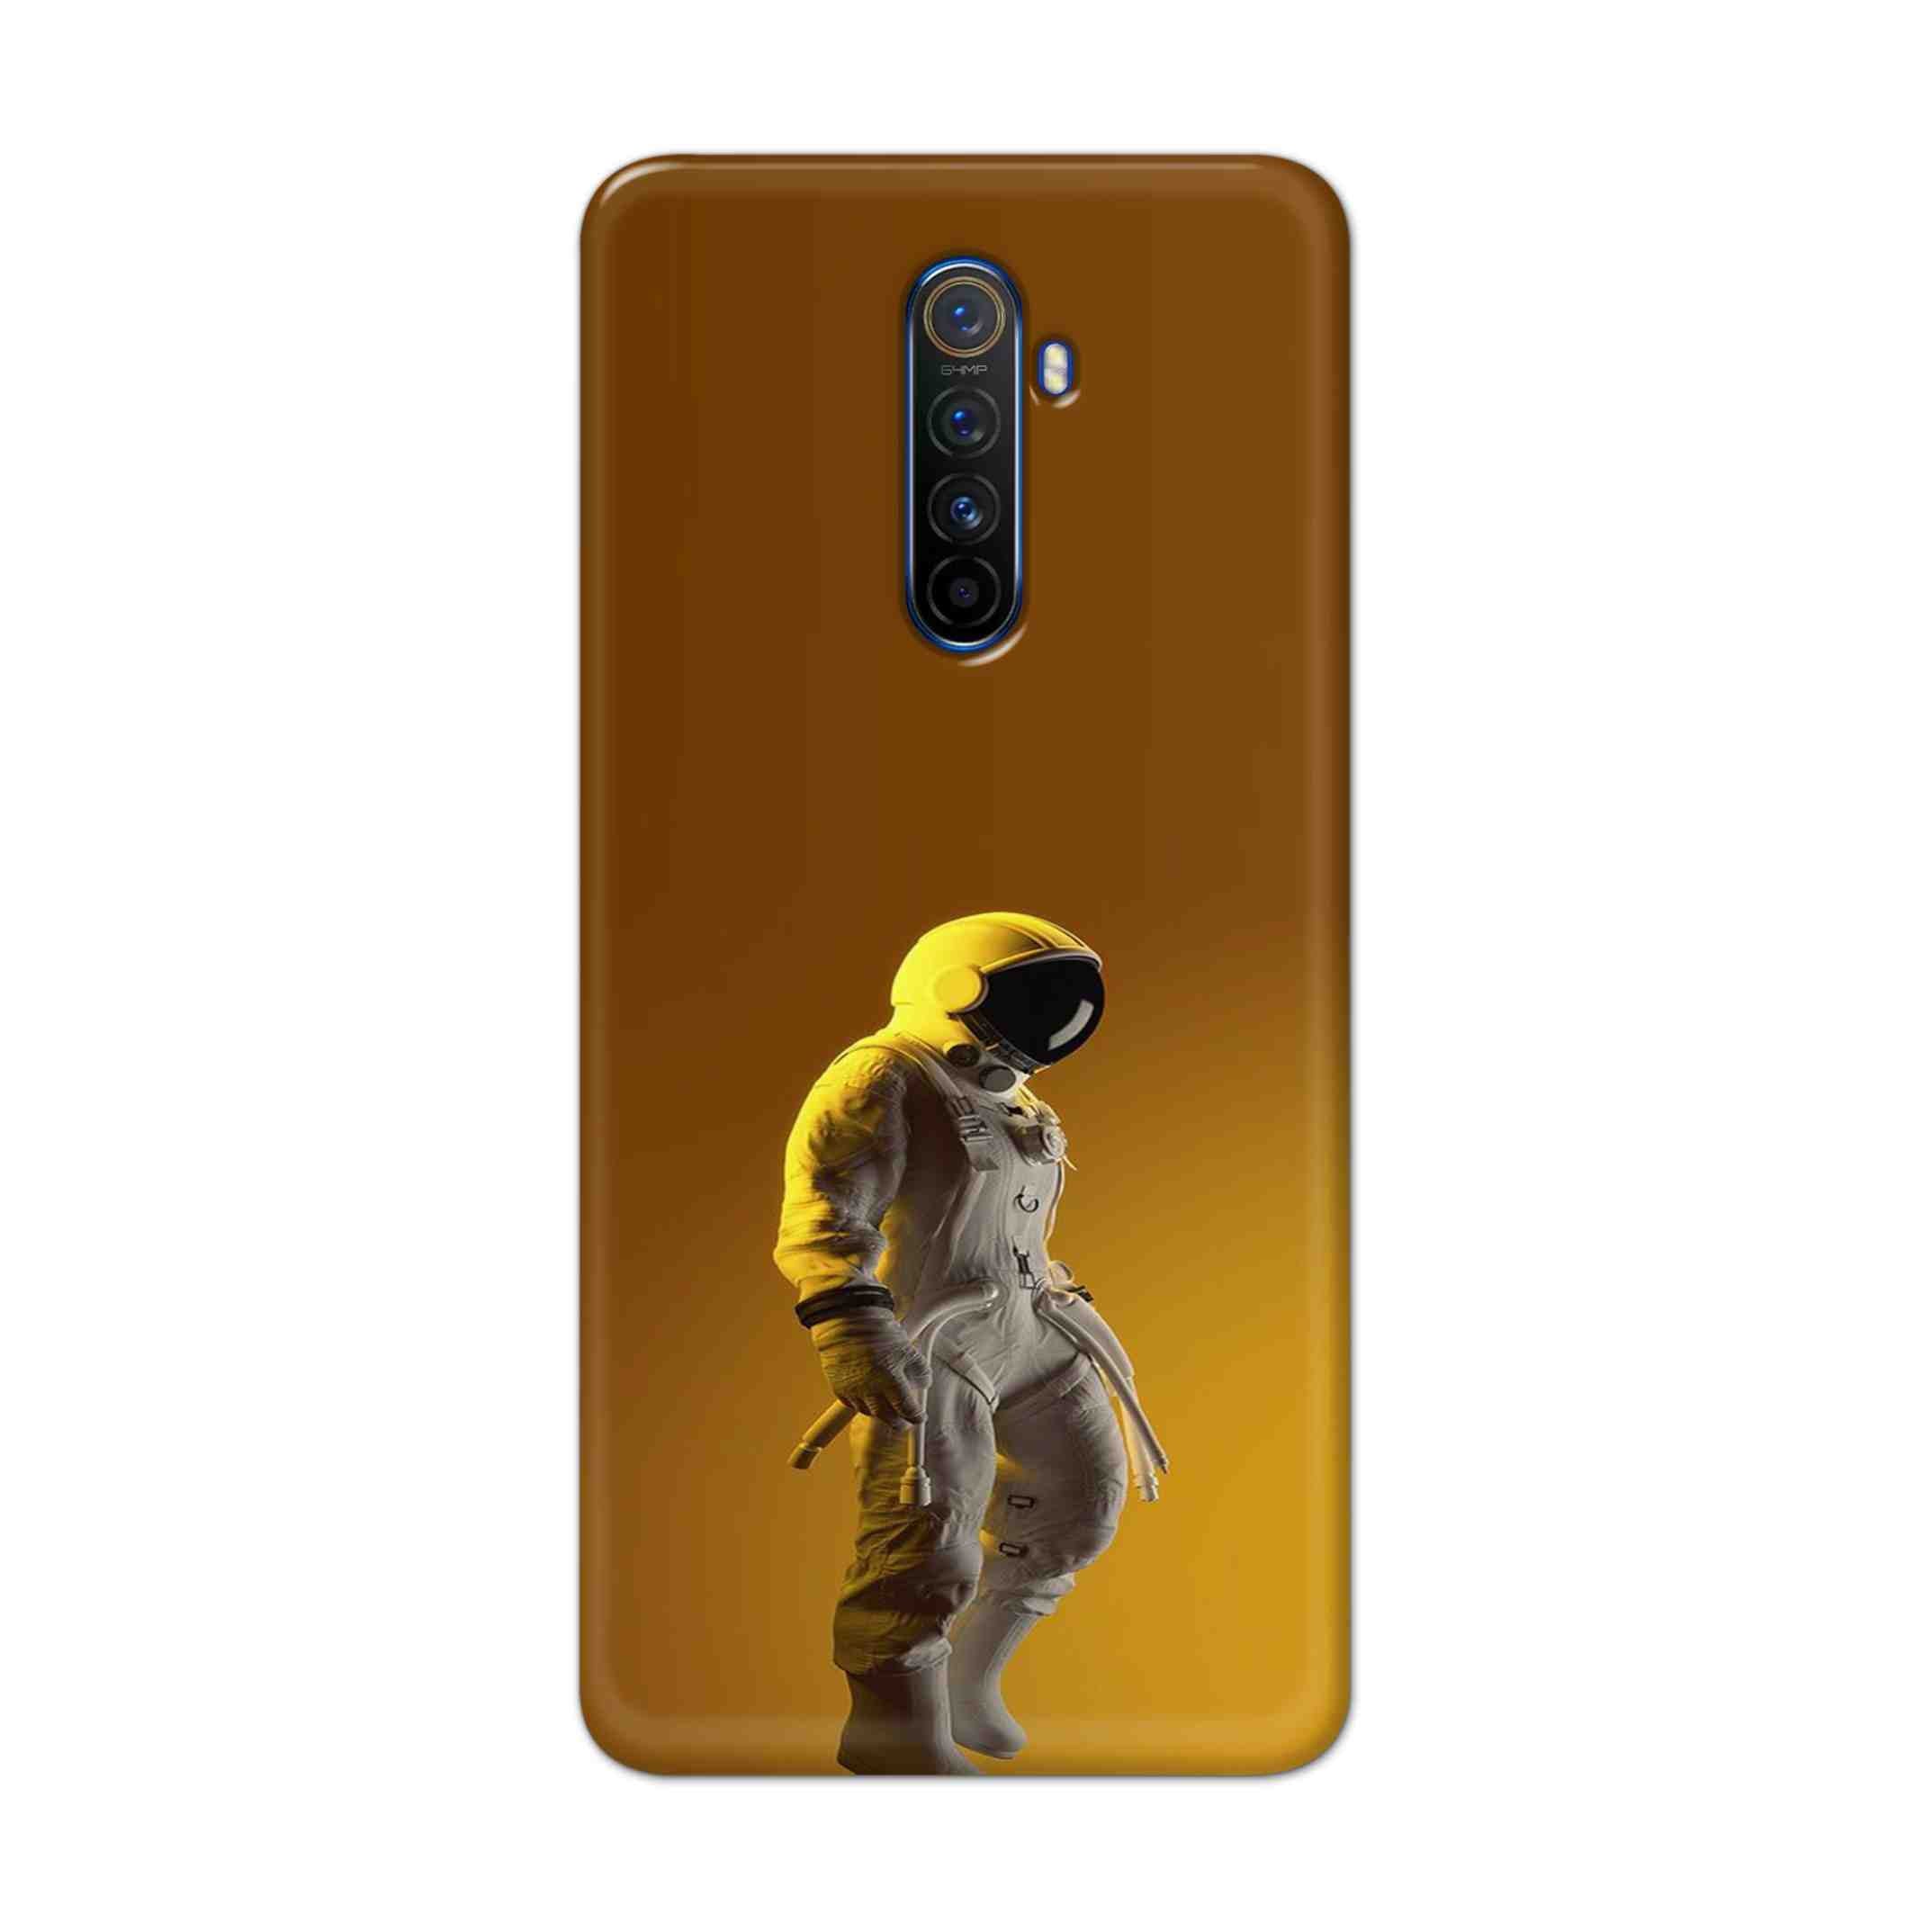 Buy Yellow Astronaut Hard Back Mobile Phone Case Cover For Realme X2 Pro Online